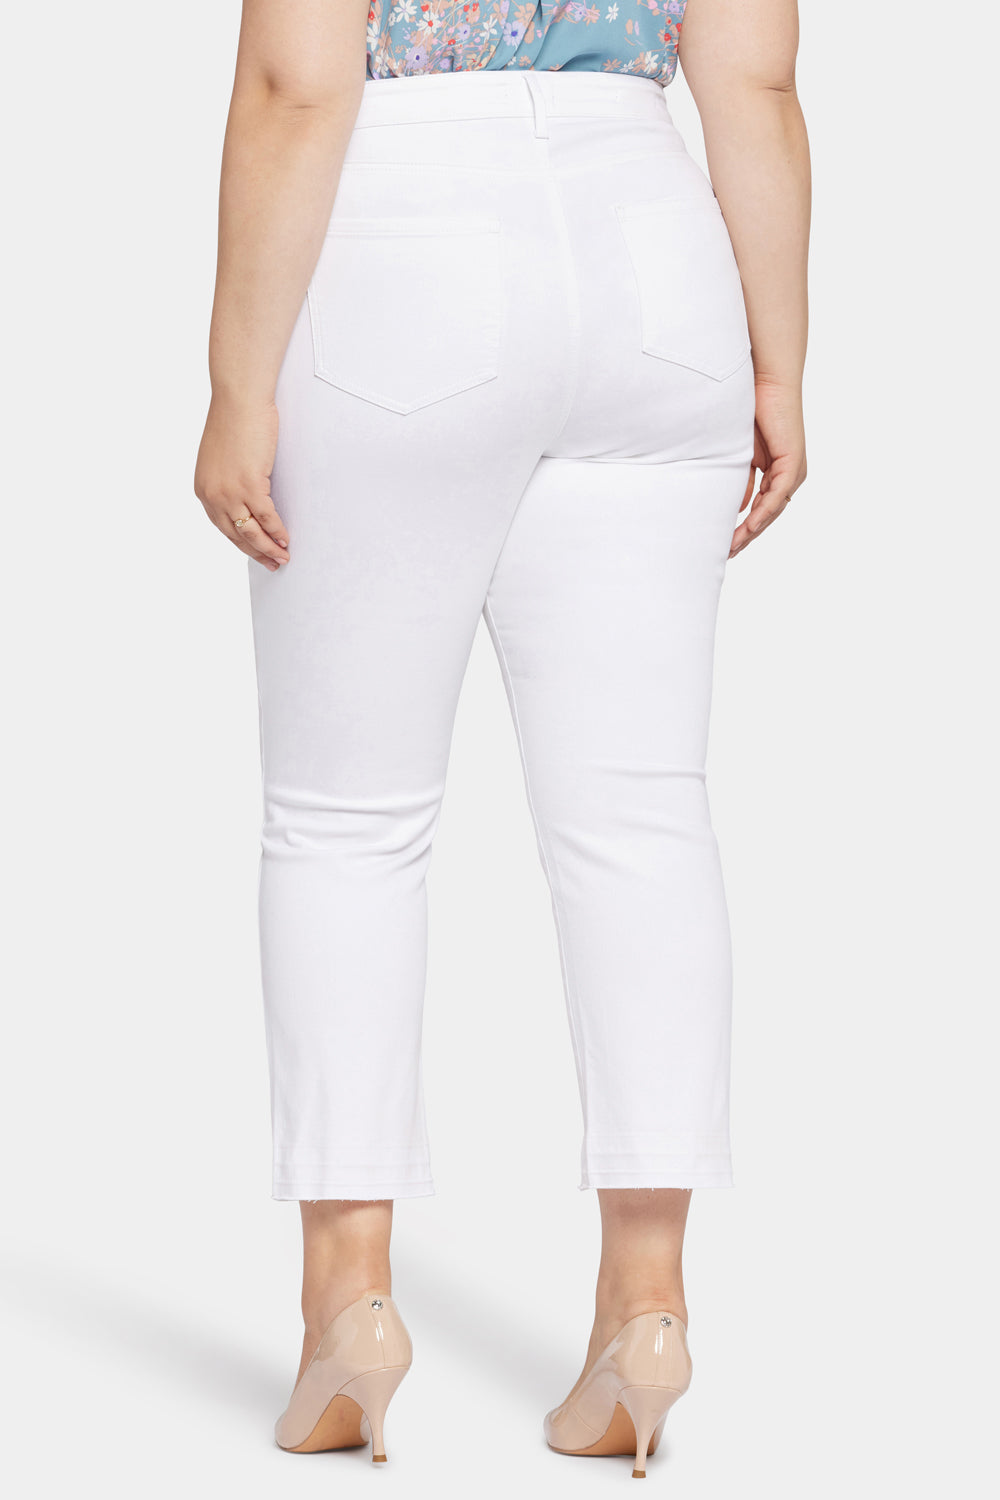 NYDJ Marilyn Straight Ankle Jeans In Plus Size In Cool Embrace® Denim With High Rise And Released Hems - Optic White